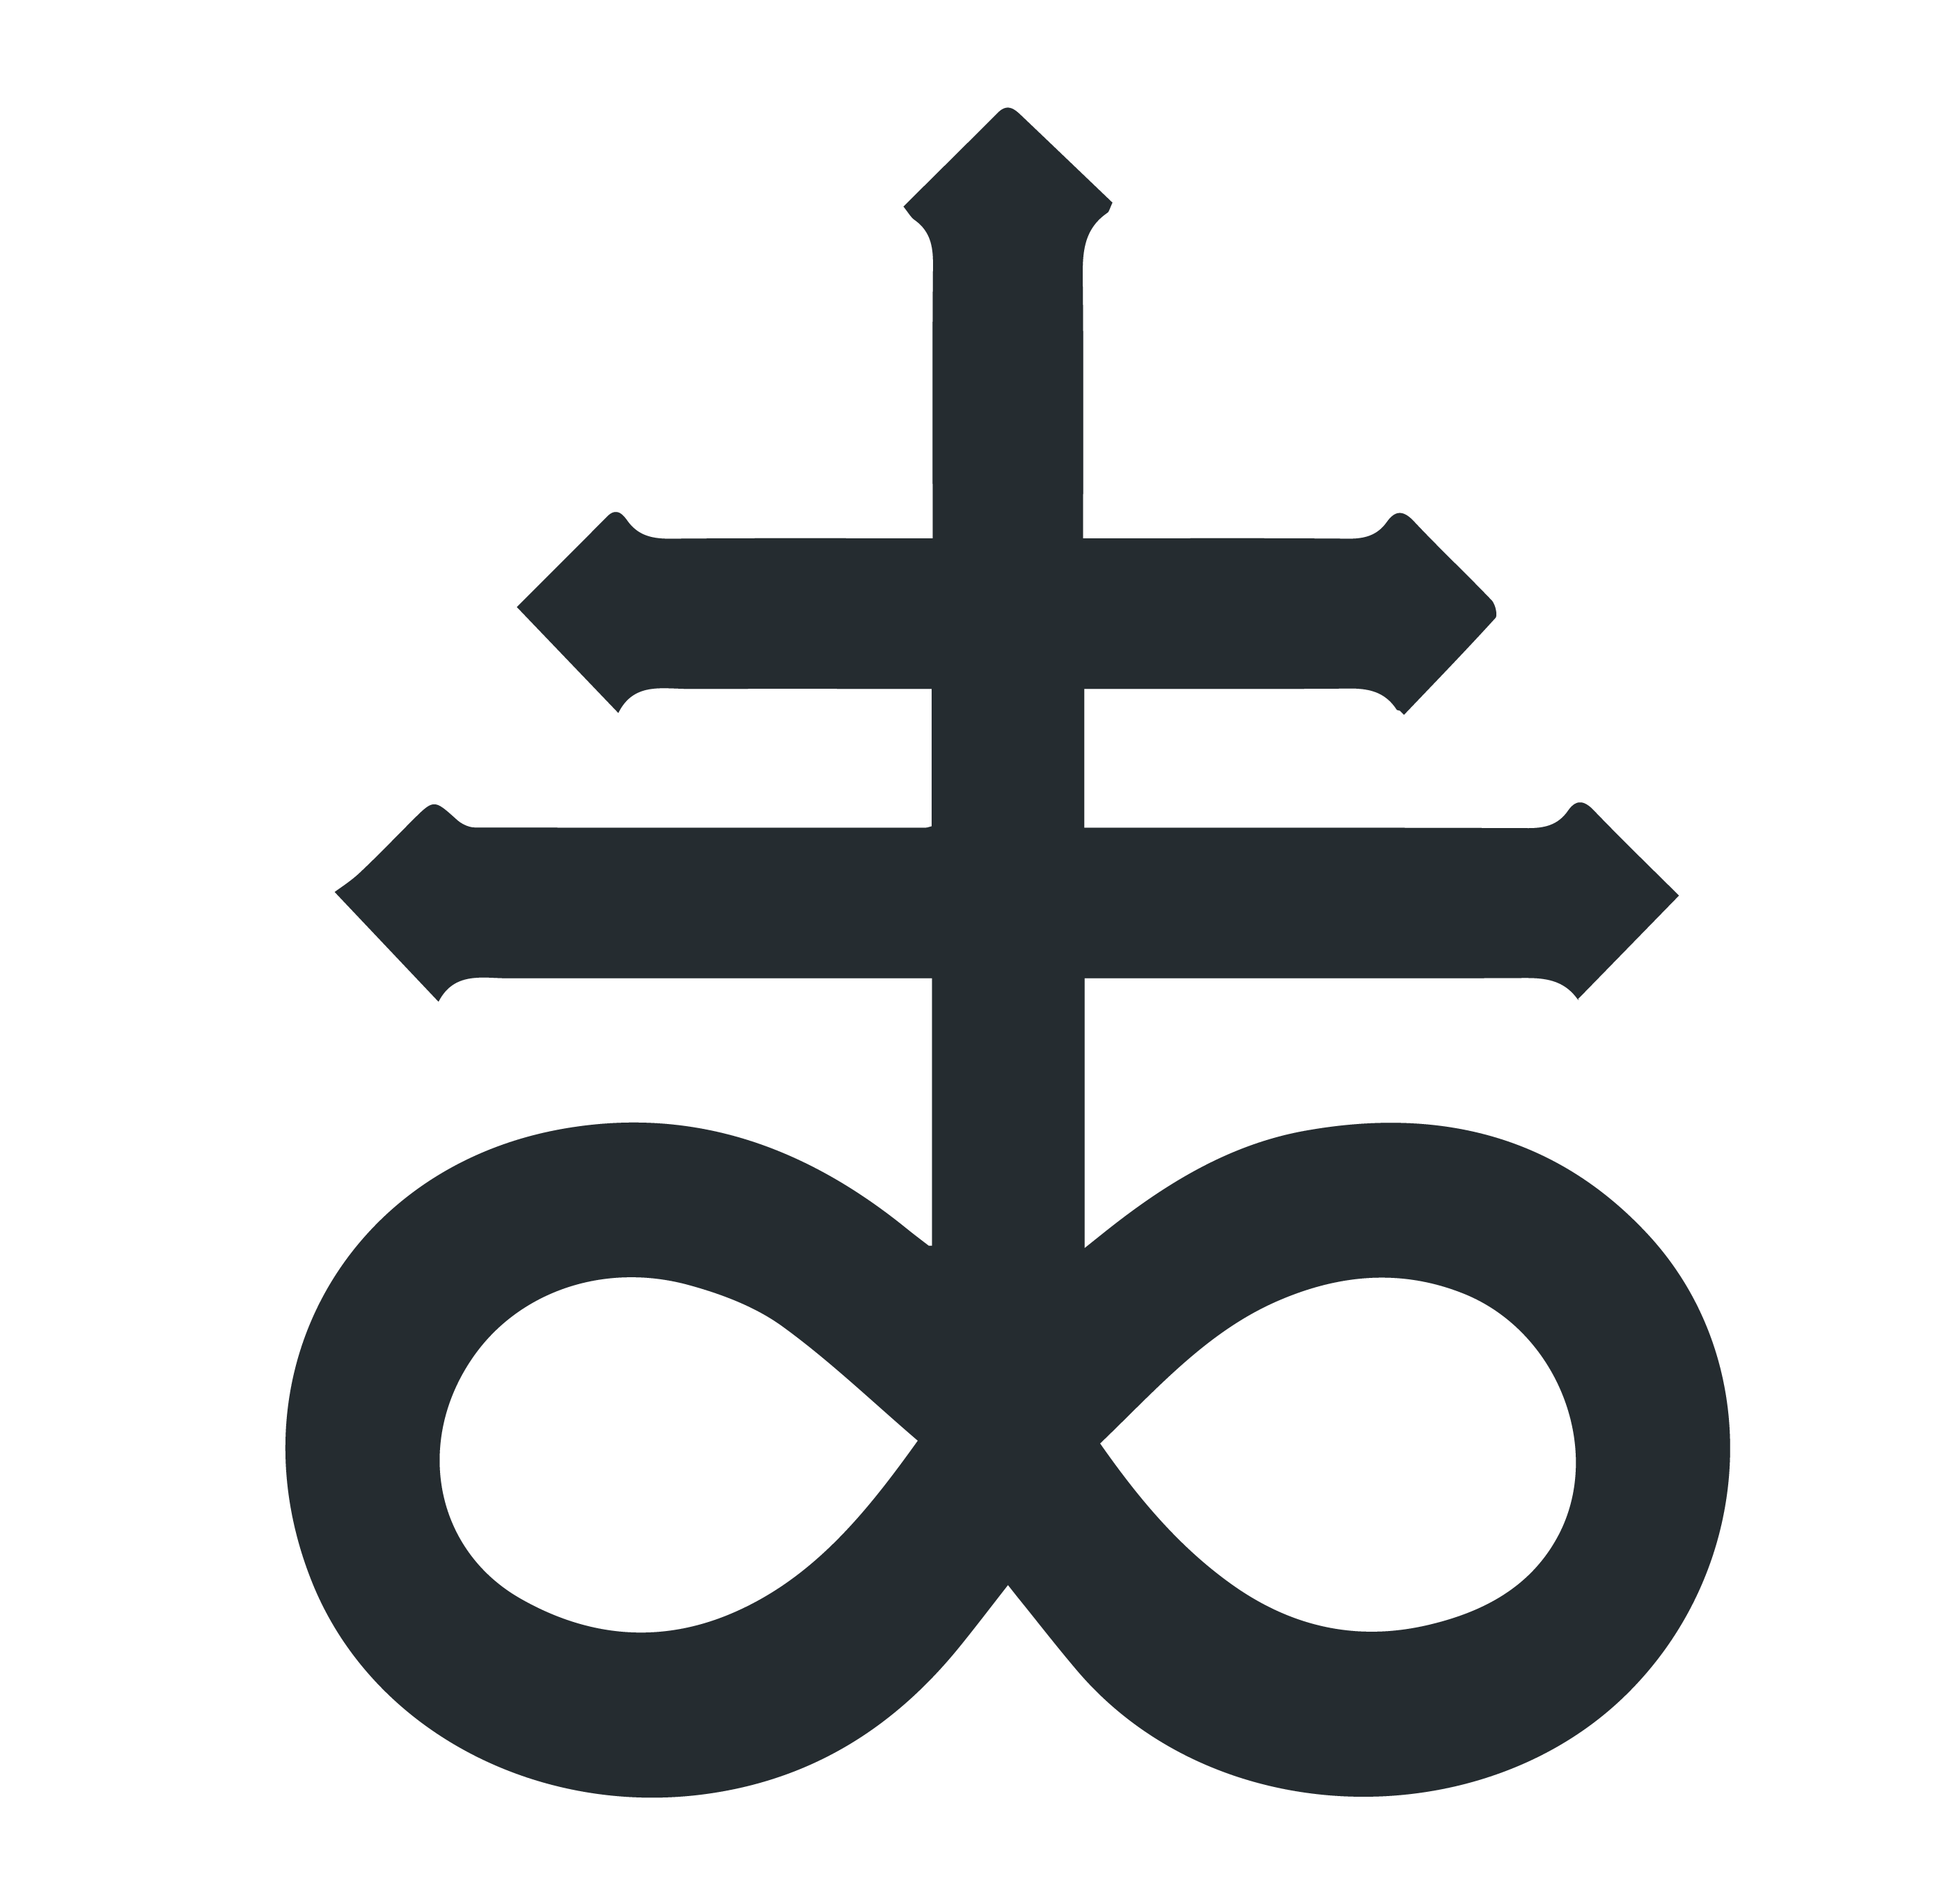 Upside Down W Logo - The Leviathan Cross (Satan's Cross) Symbol and Its Meaning ...